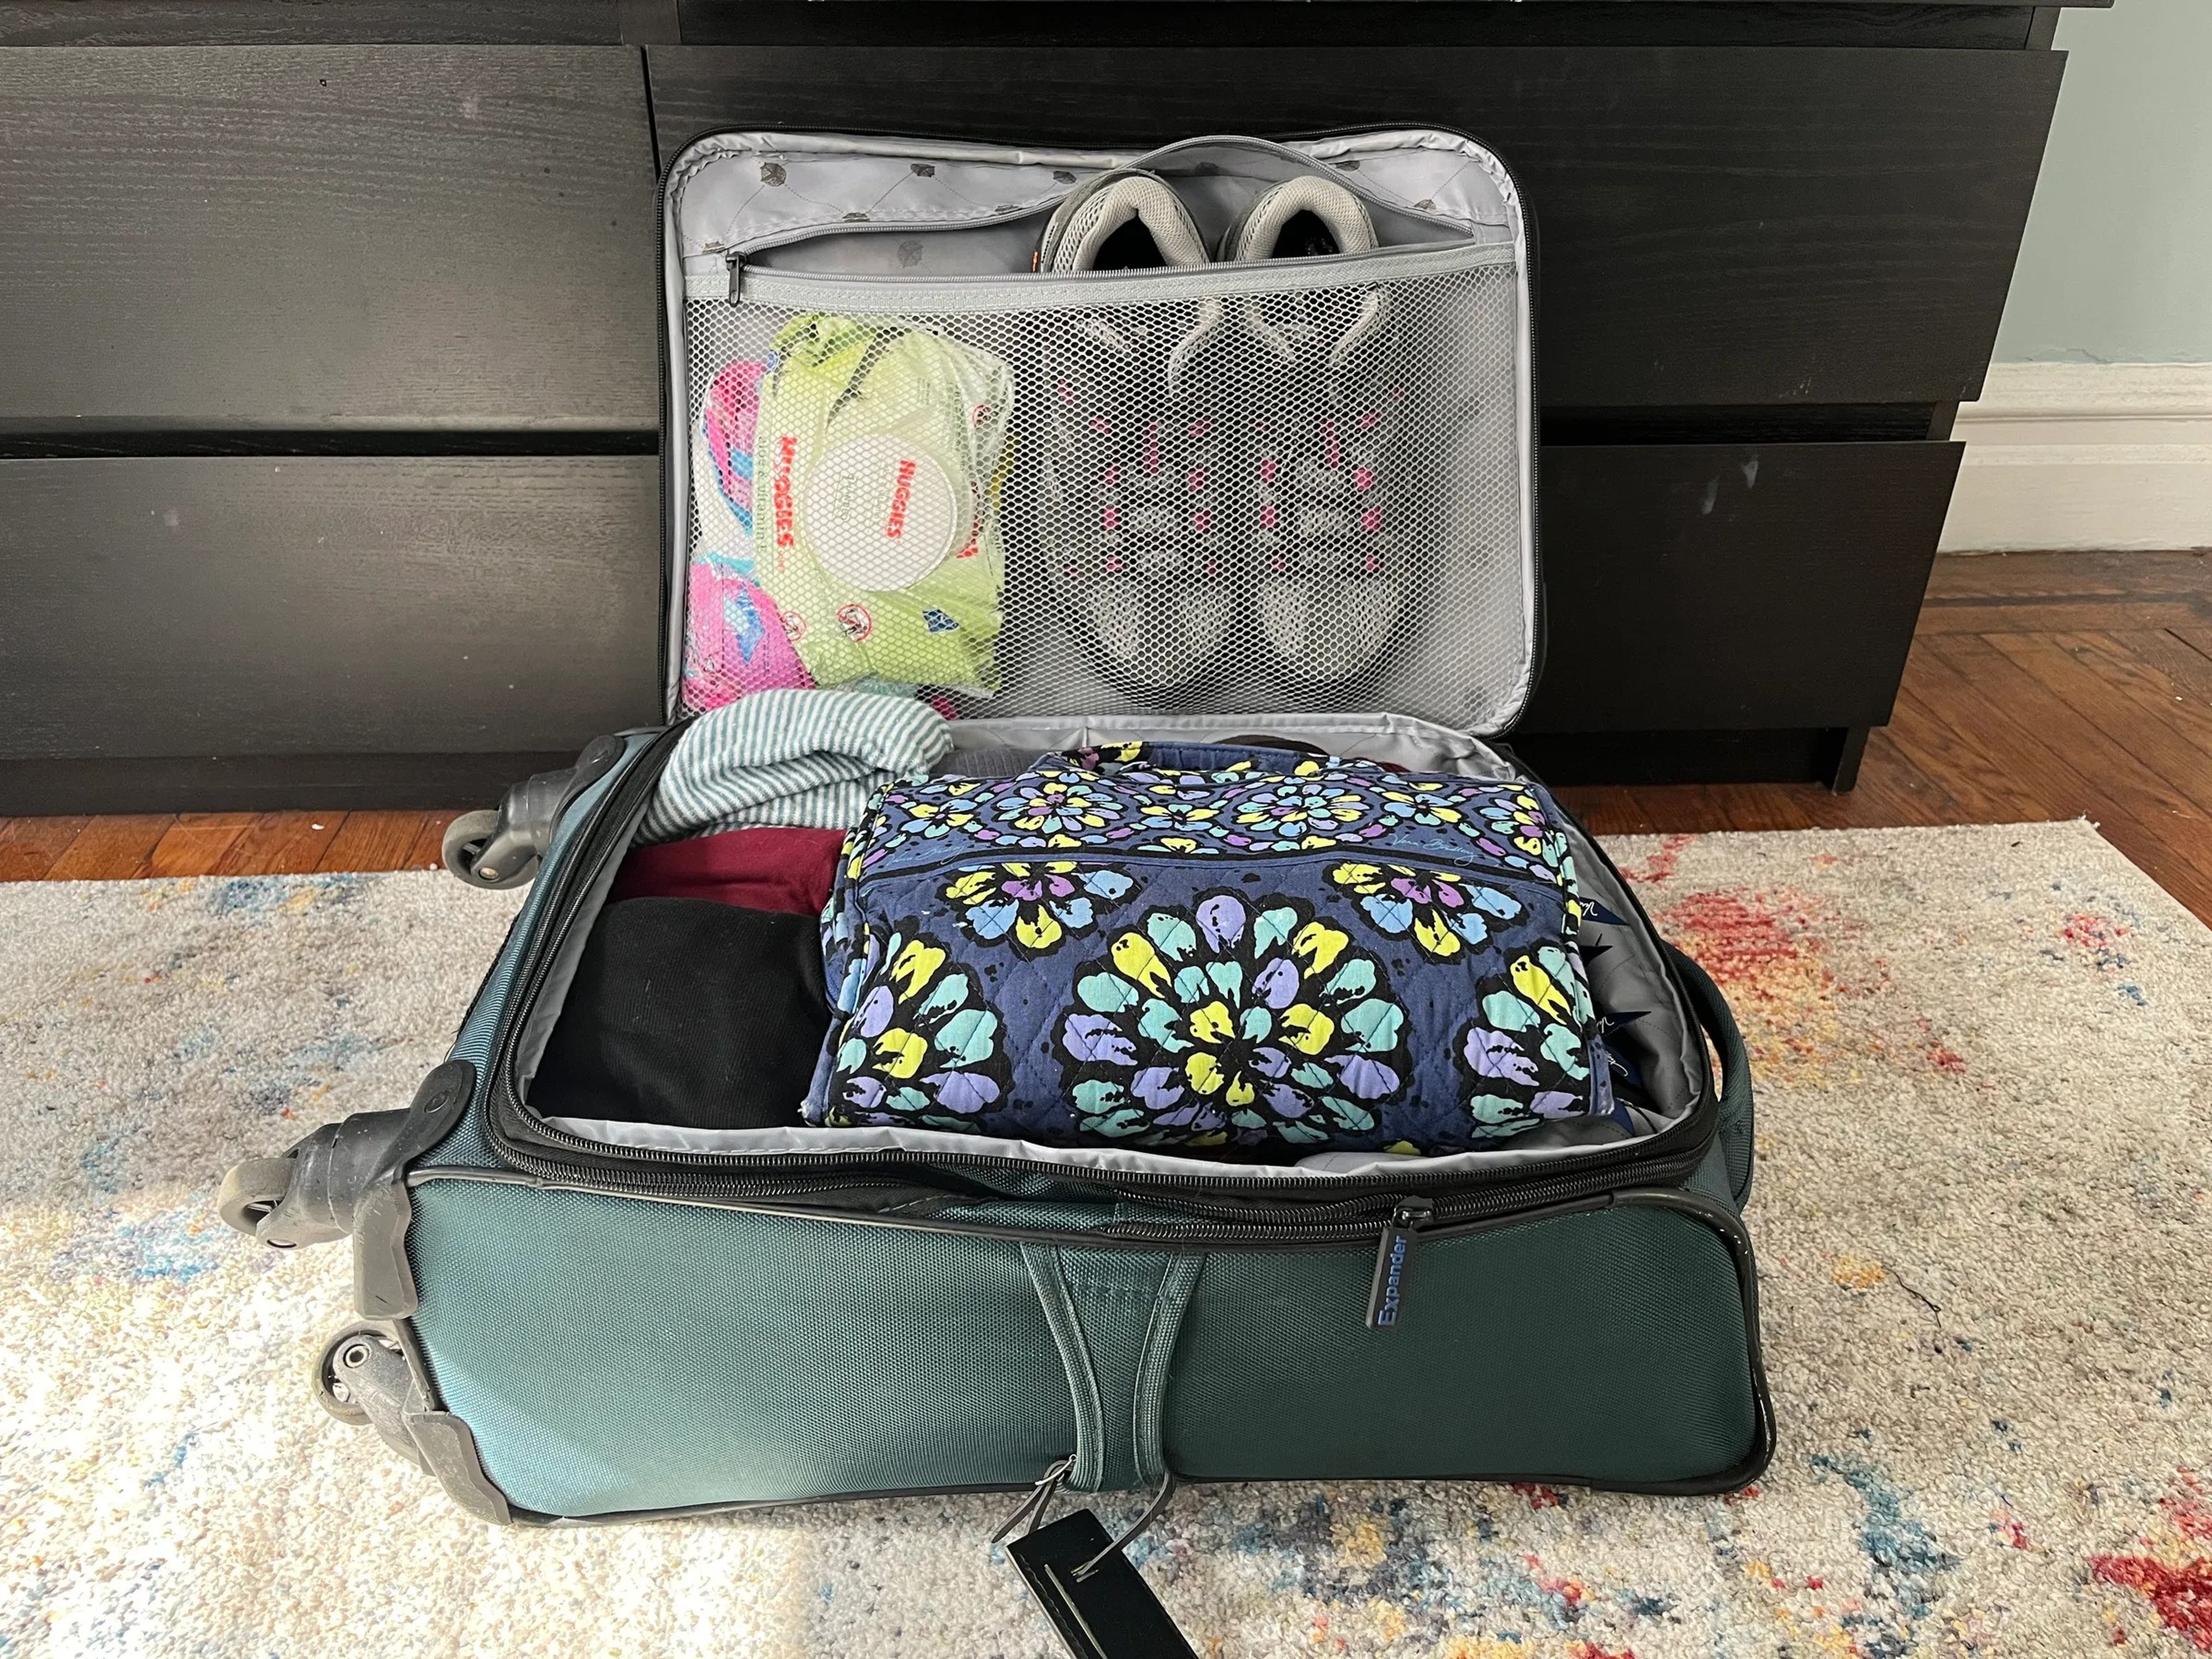 A carry on suitcase packed with shoes and clothes